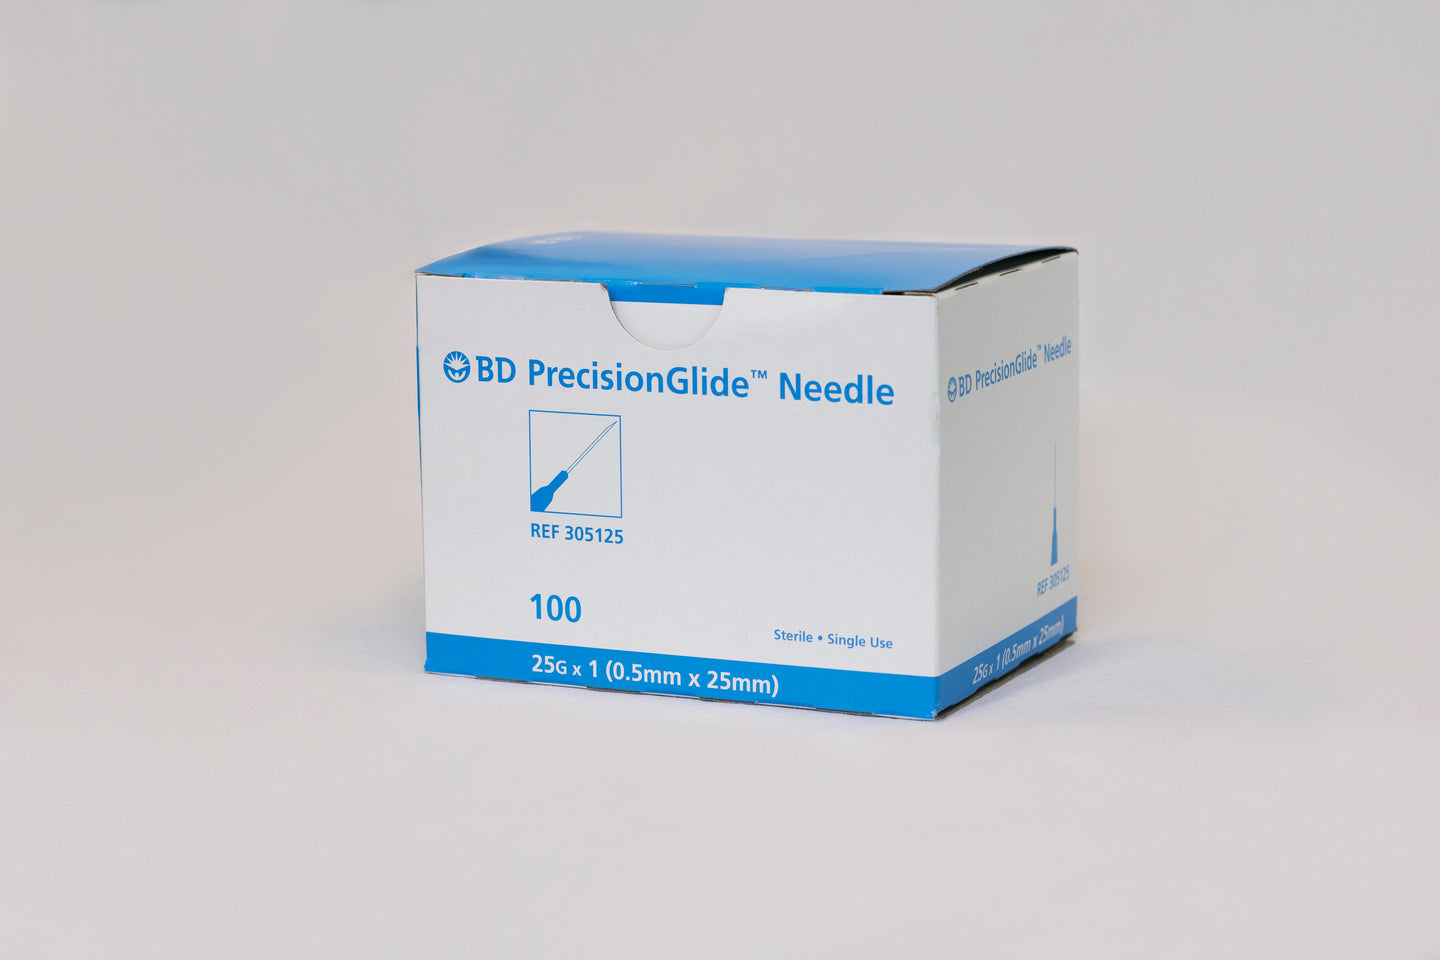 Introducer Needle for Dermal Fillers (25G x 1)